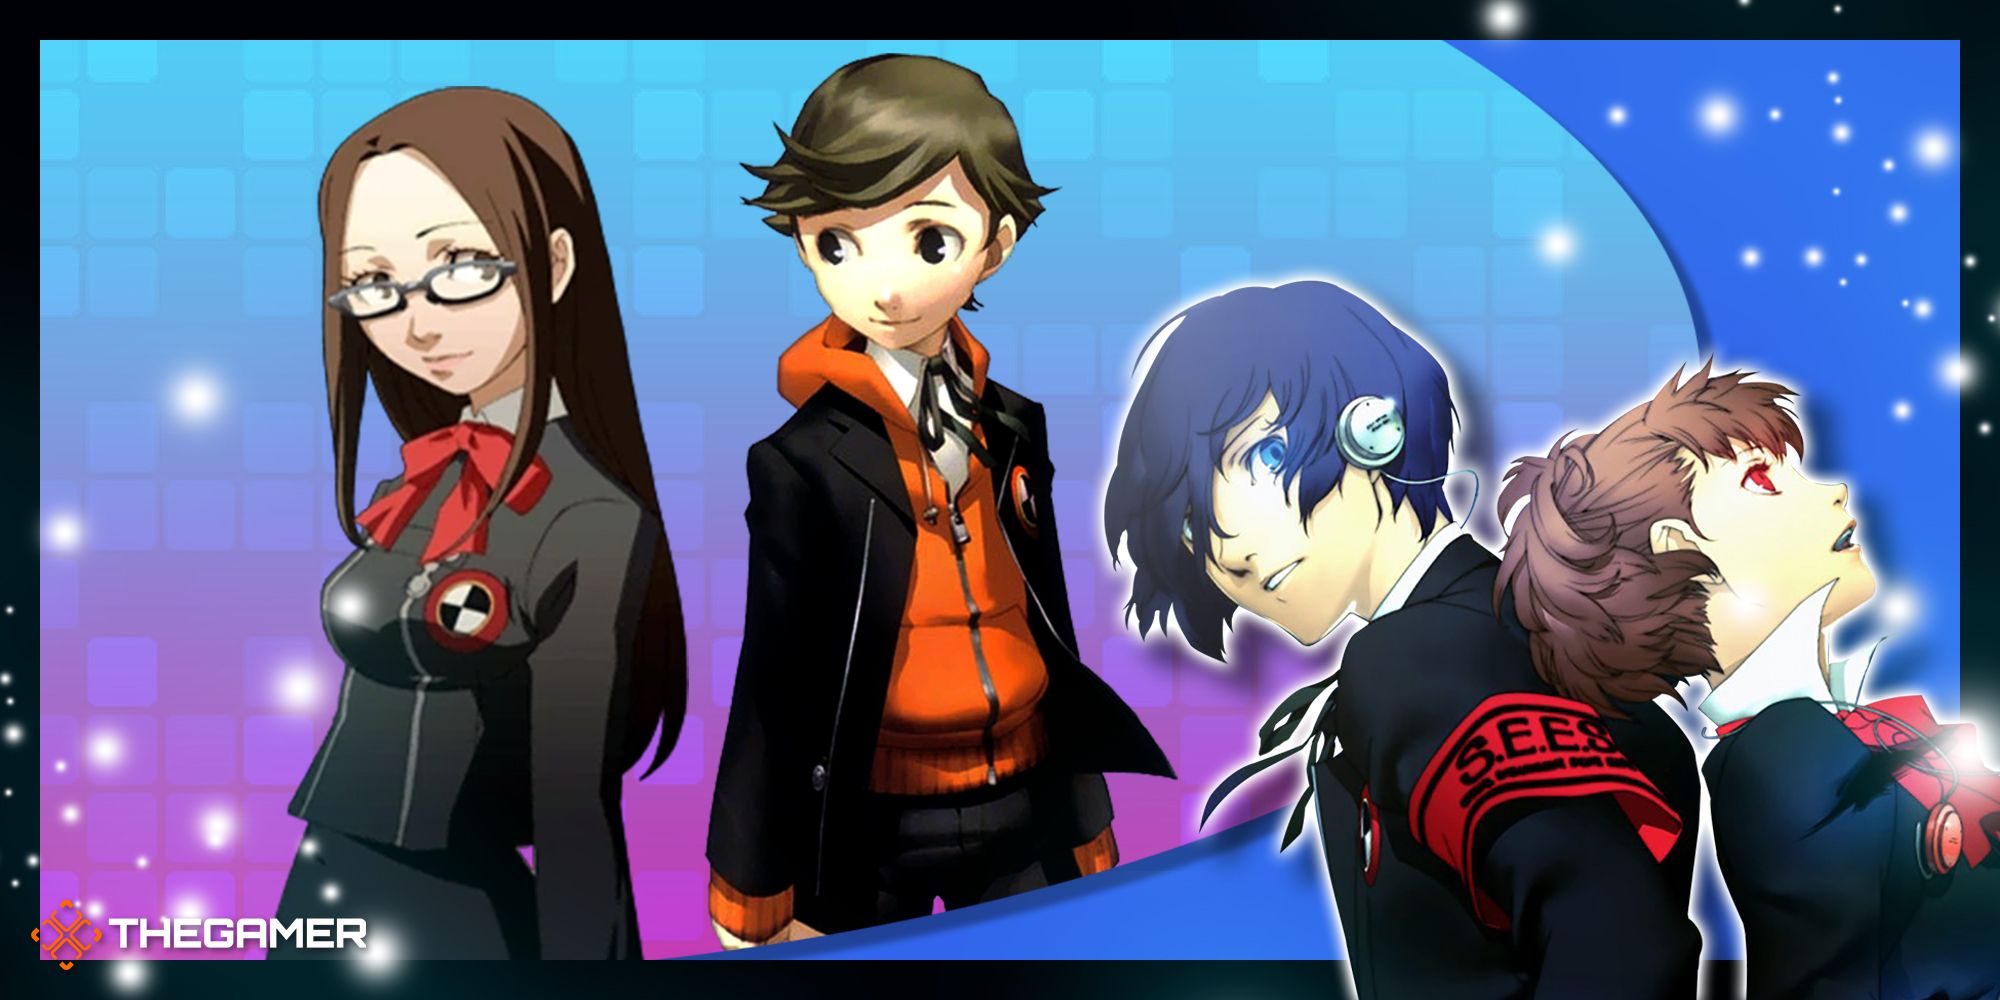 chihiro fushimi and ken amada with the two protagonists of persona 3 portable